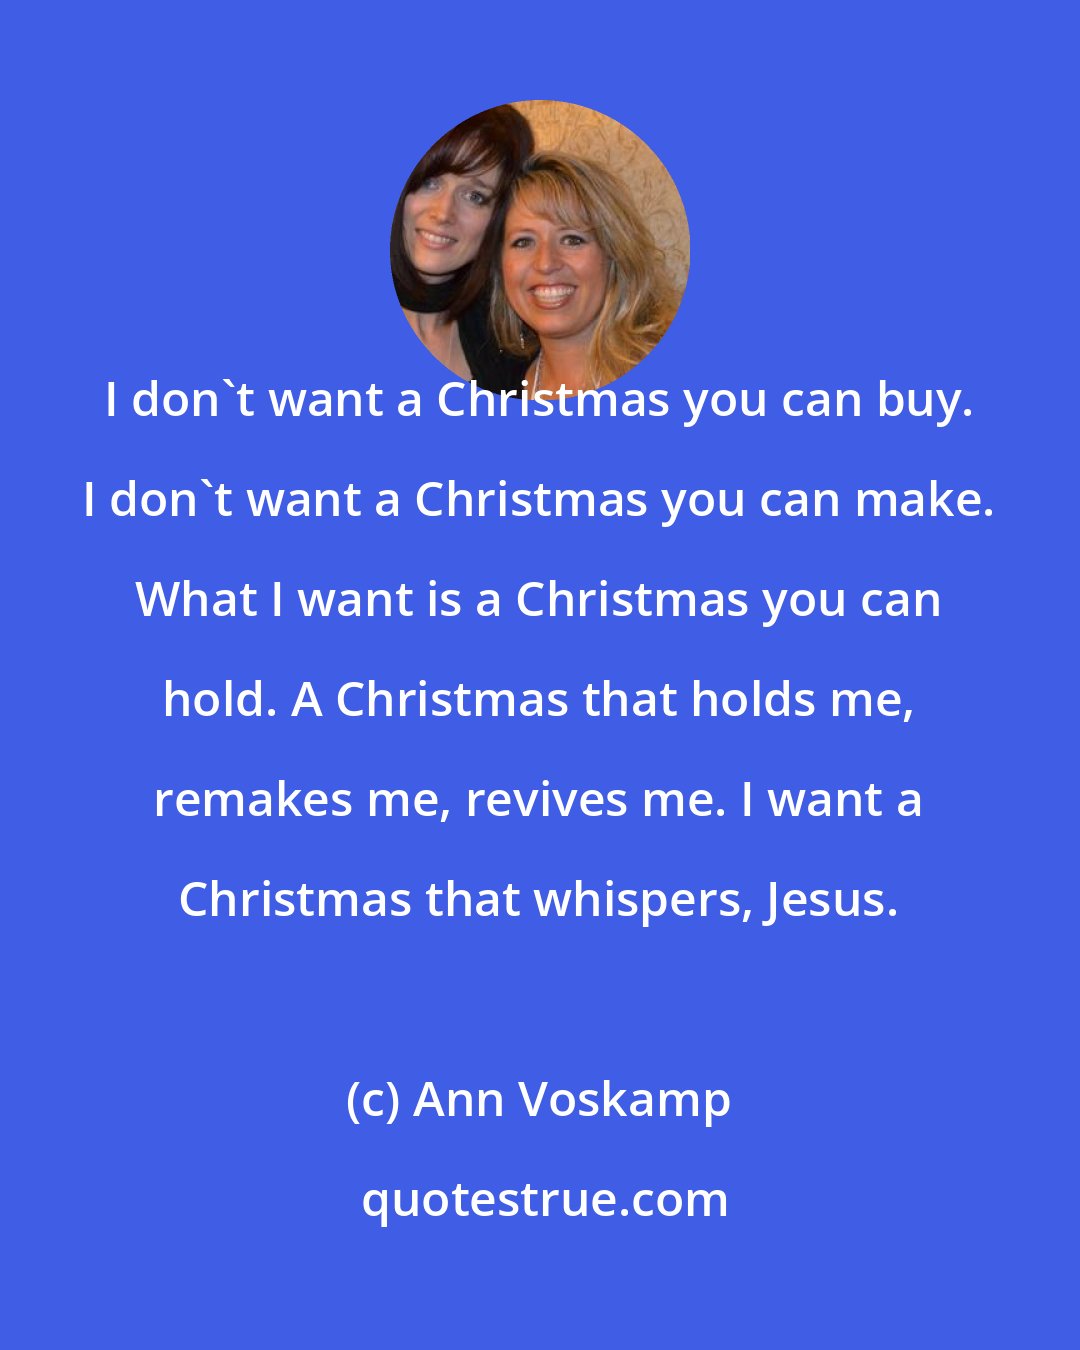 Ann Voskamp: I don't want a Christmas you can buy. I don't want a Christmas you can make. What I want is a Christmas you can hold. A Christmas that holds me, remakes me, revives me. I want a Christmas that whispers, Jesus.